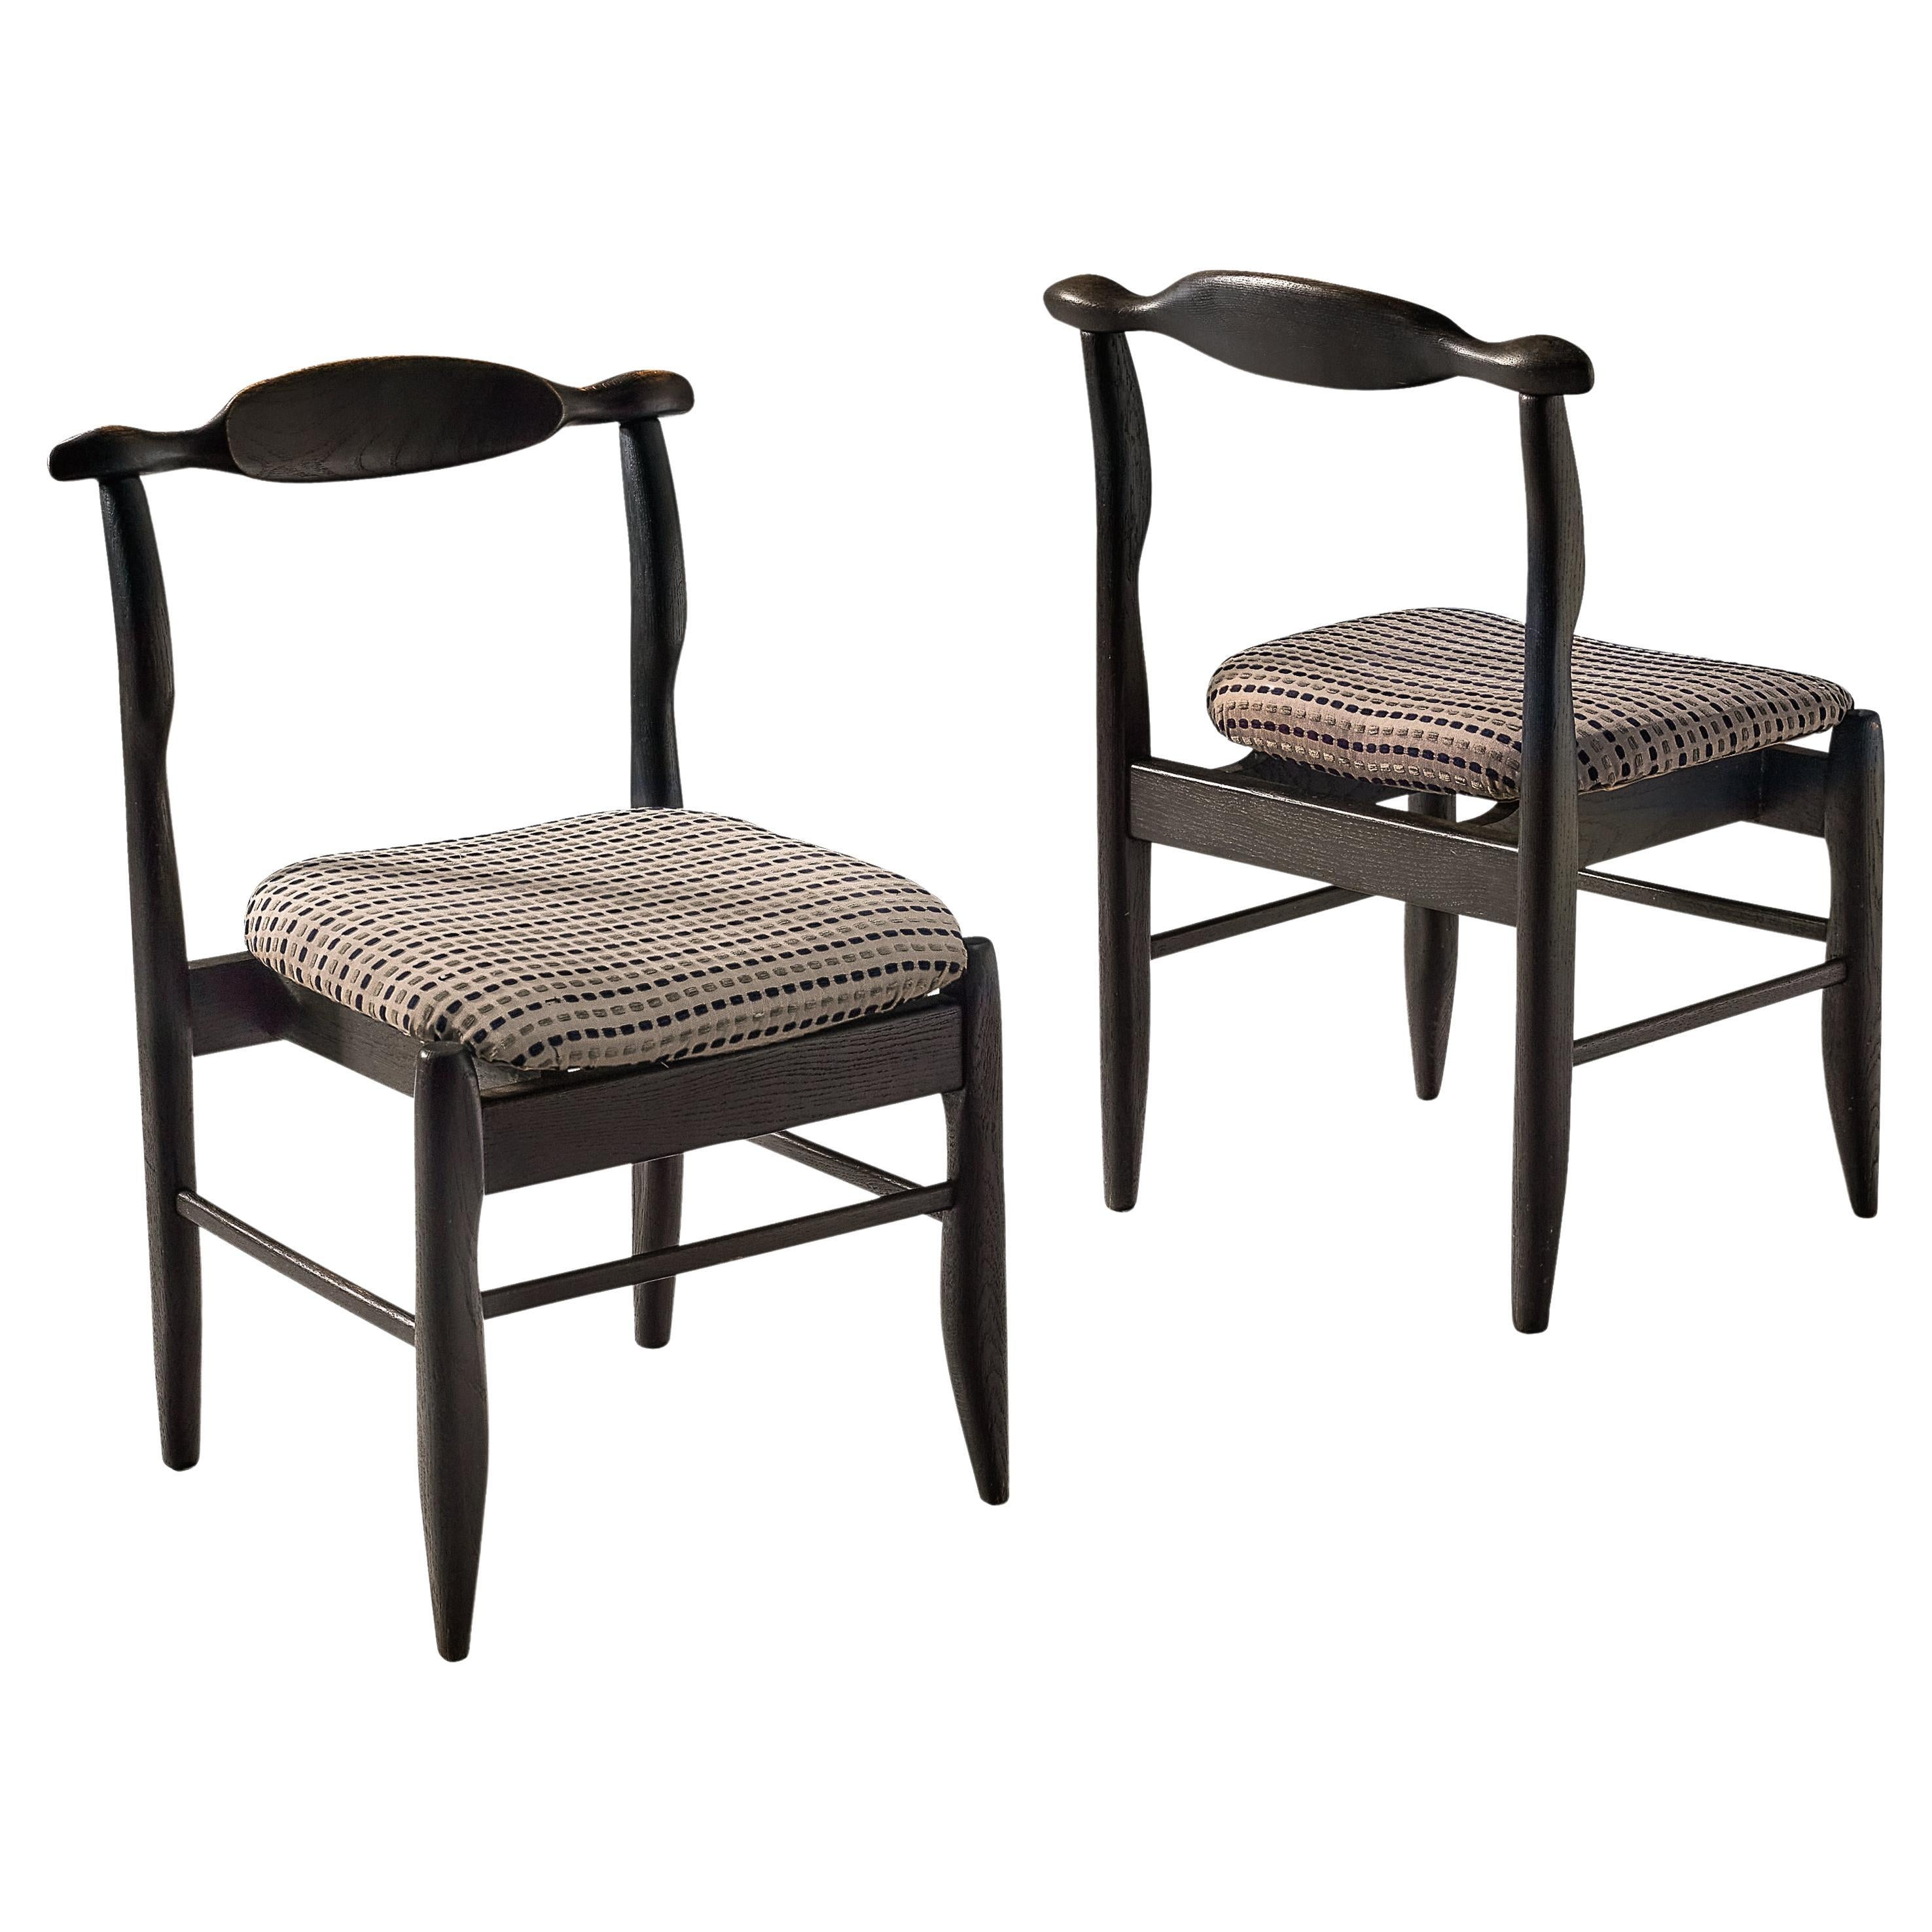 Guillerme & Chambron Pair of 'Fumay' Dining Chairs